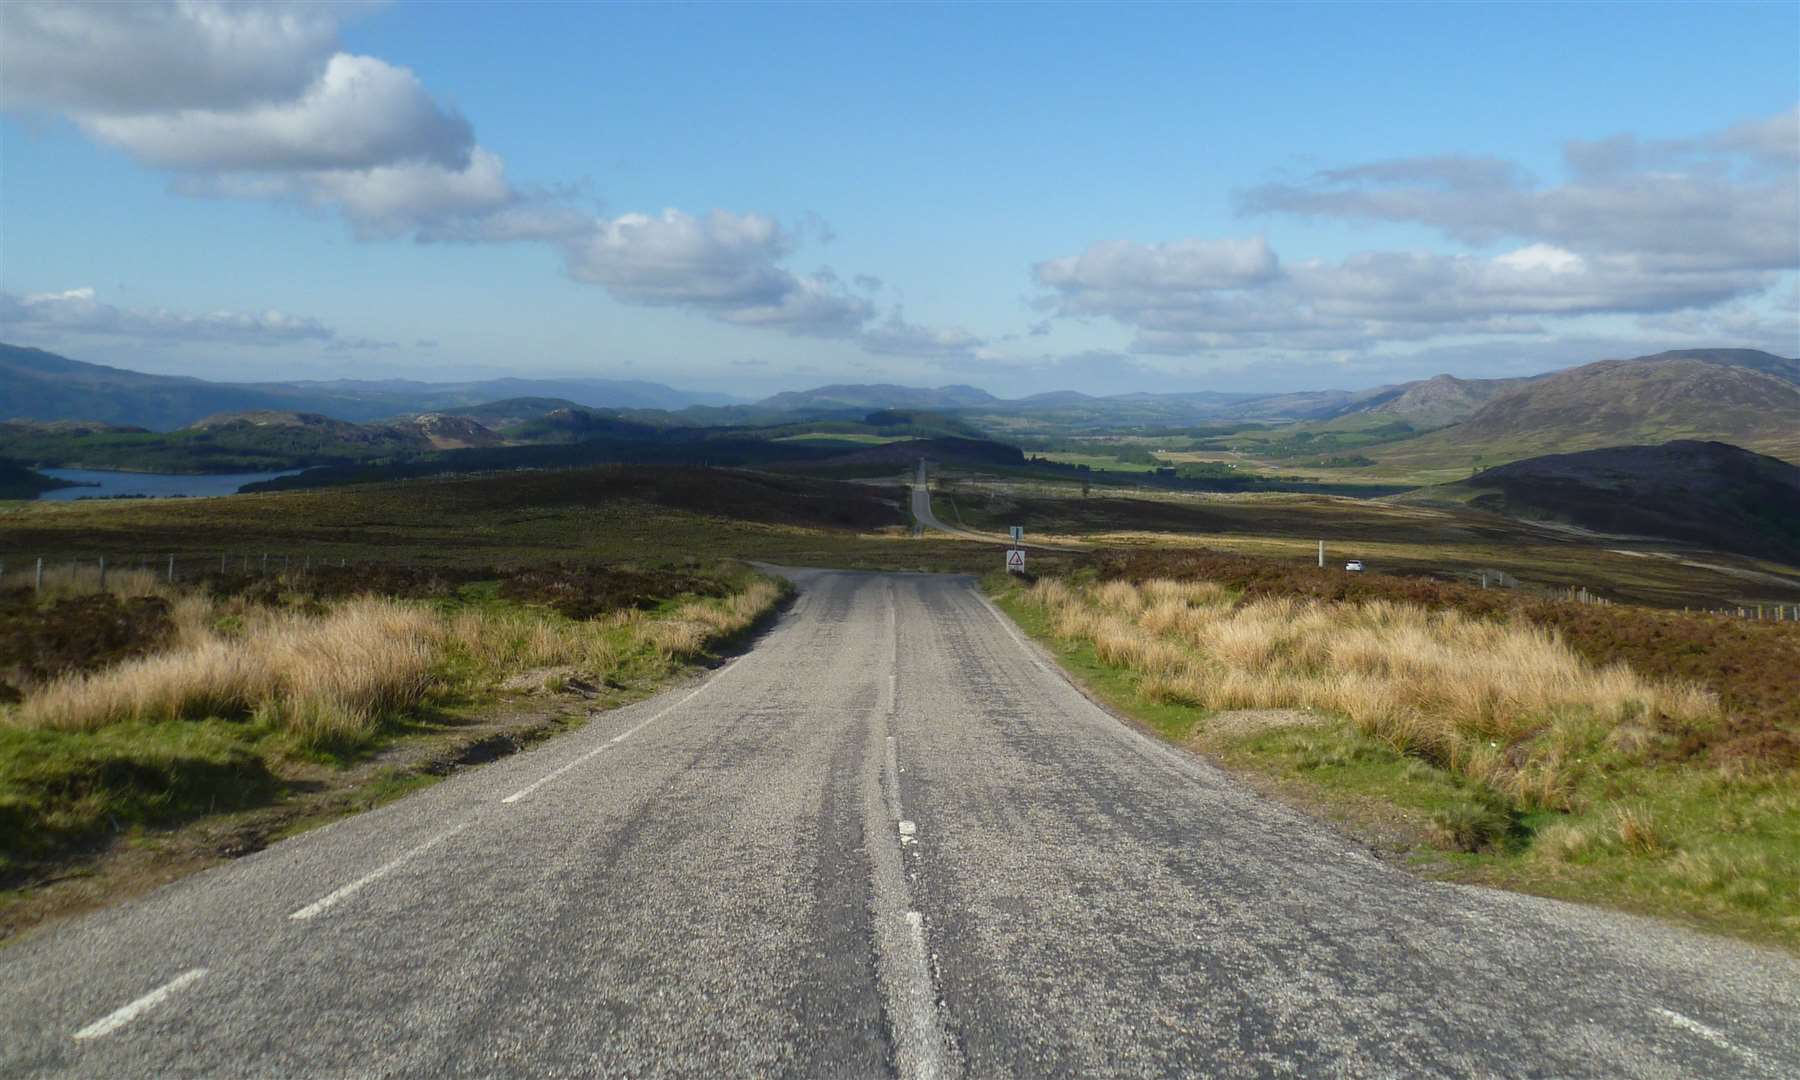 General Wade's Military Road from Inverness to Fort Augustus today.